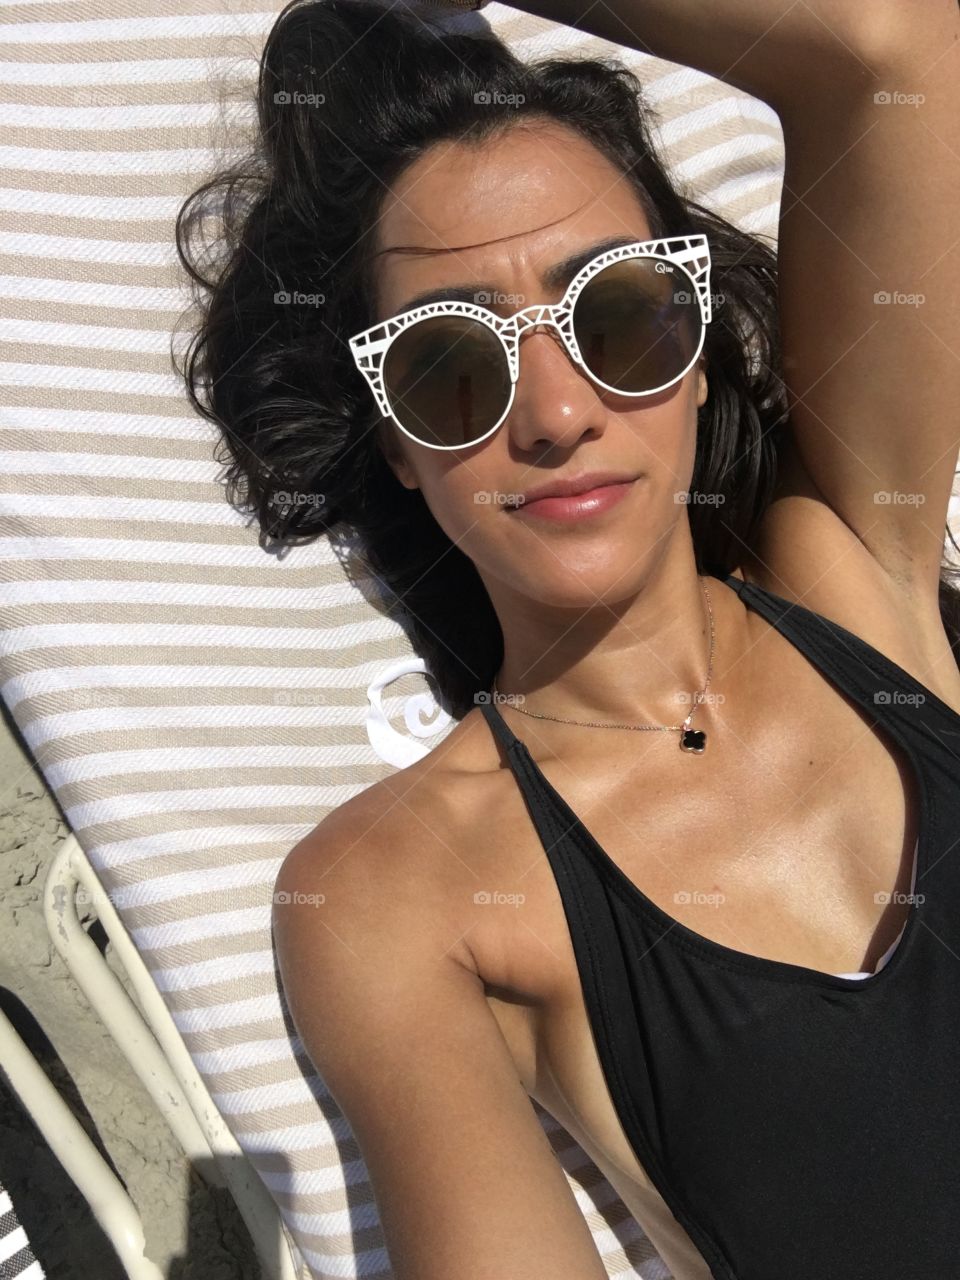 Elevated view of a beautiful woman wearing sunglasses